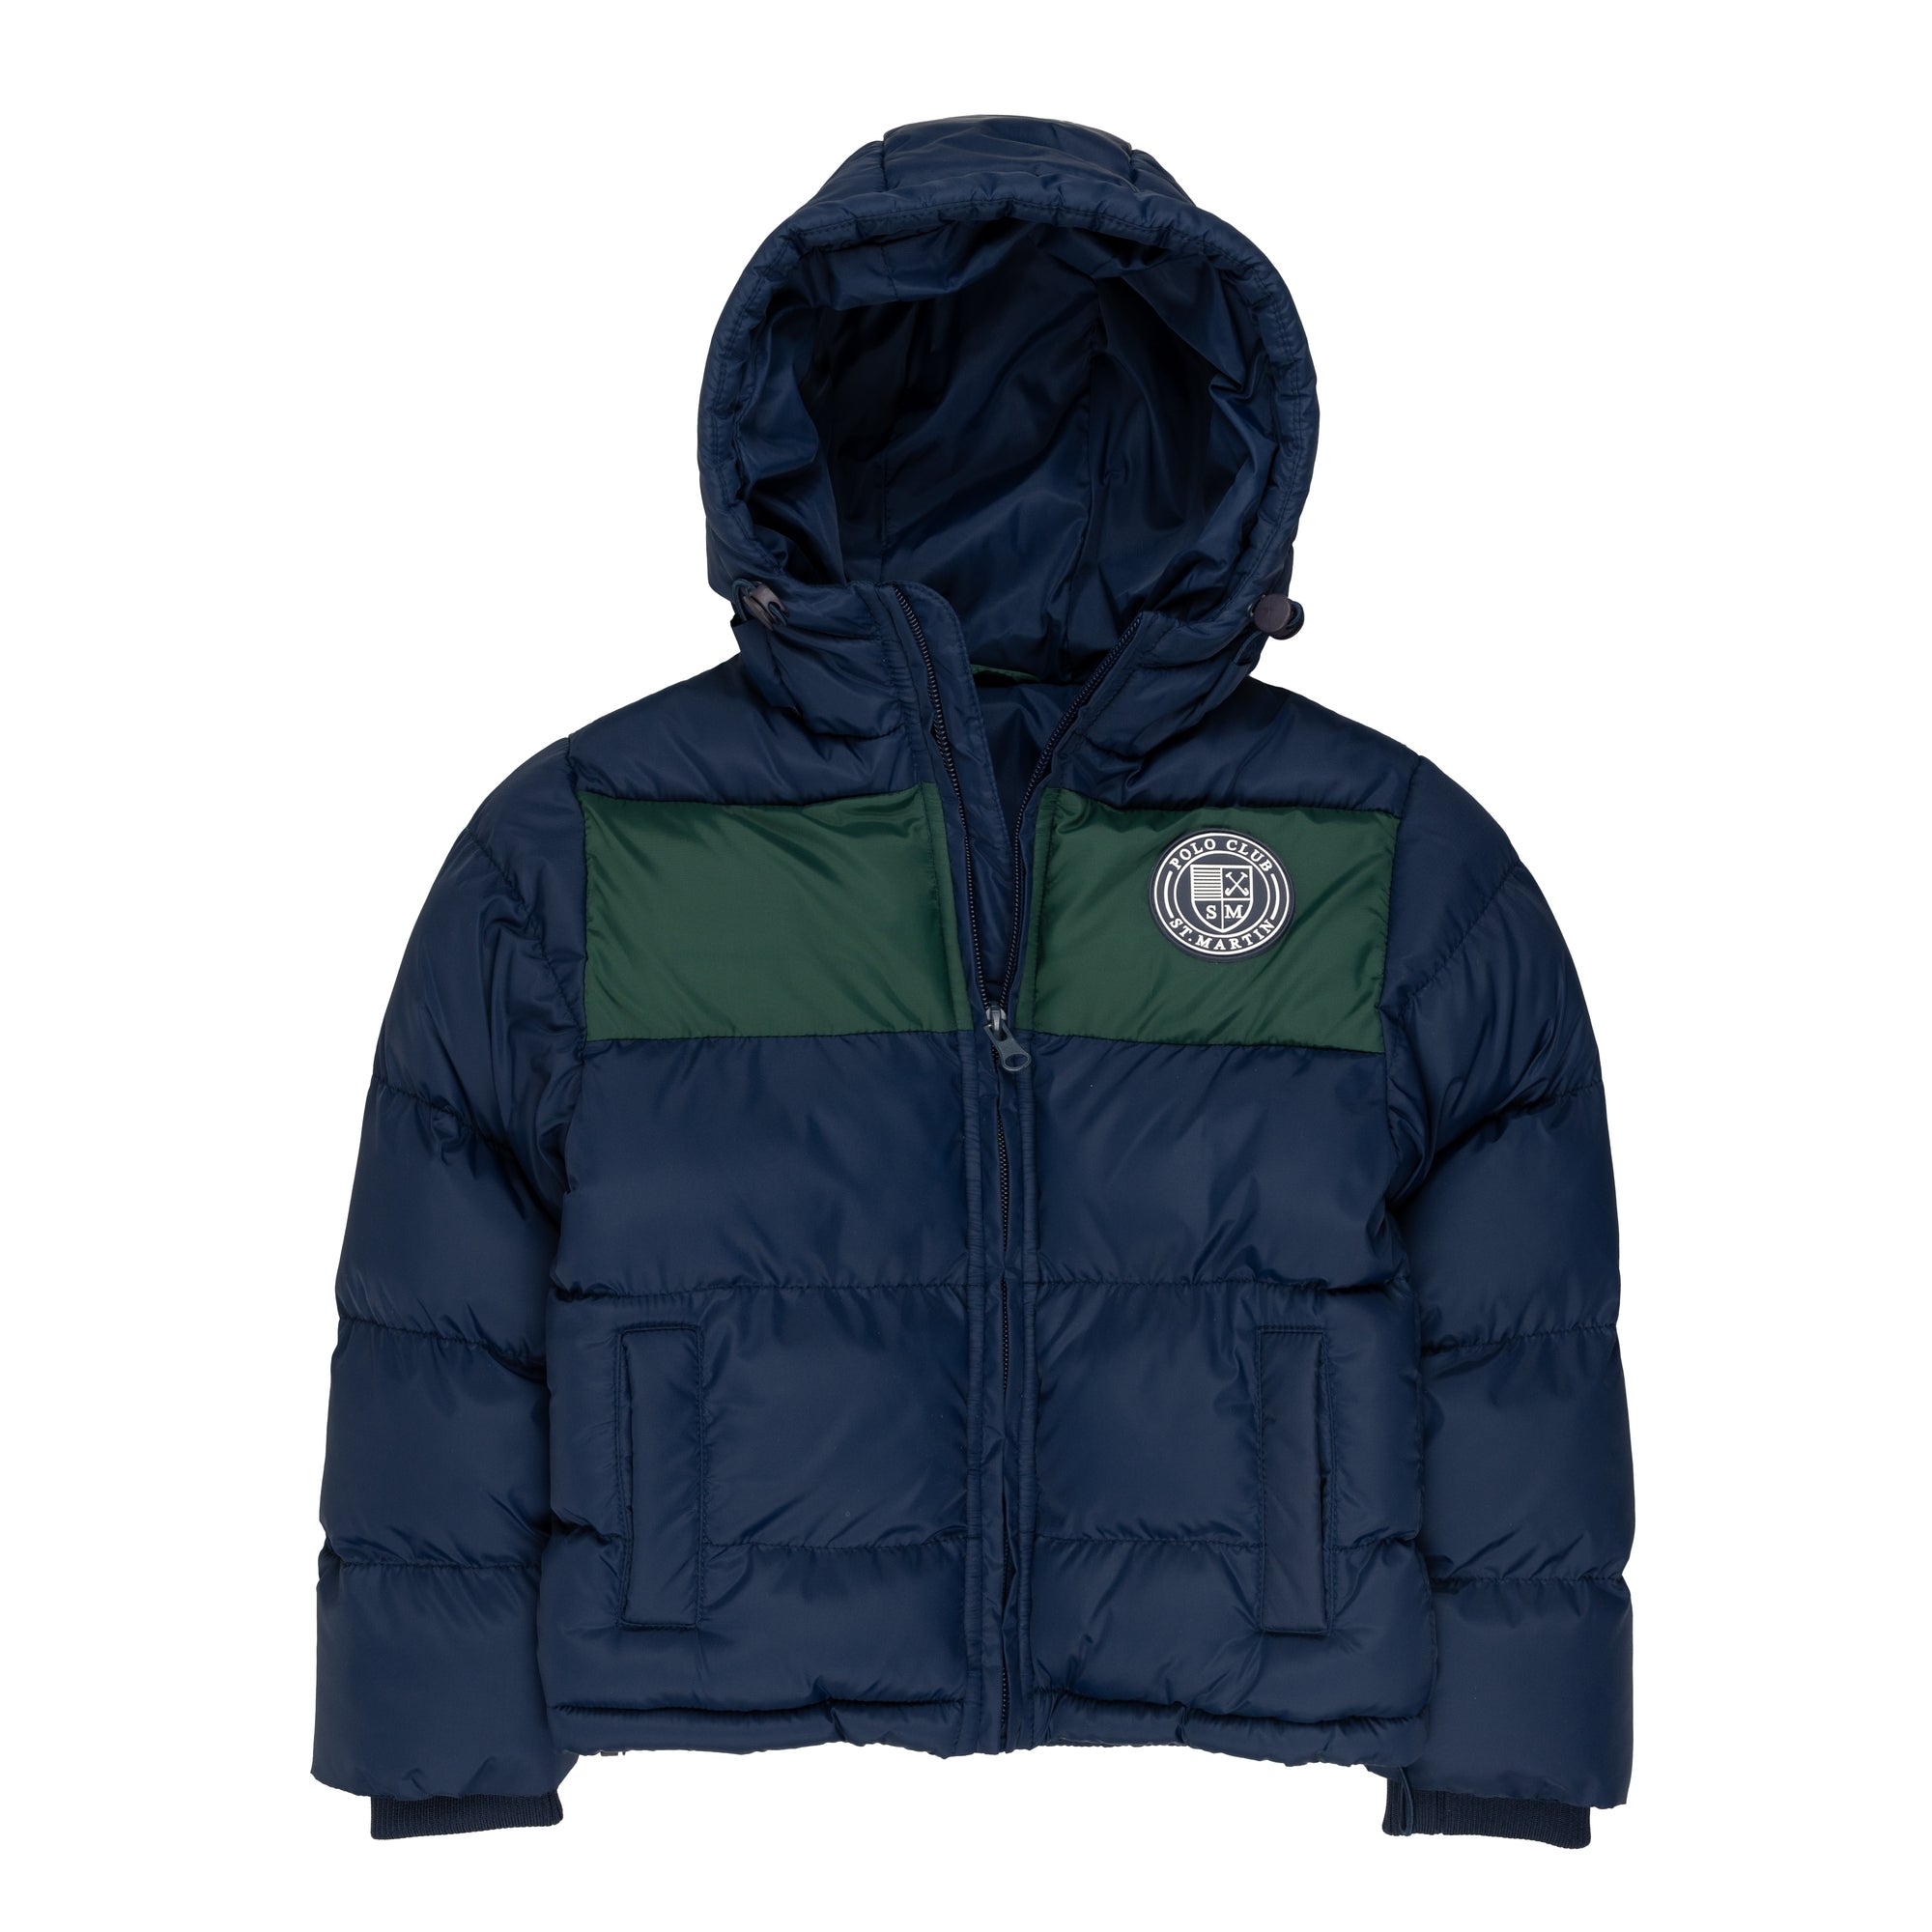 Nylon jacket with chest band, zip and hood